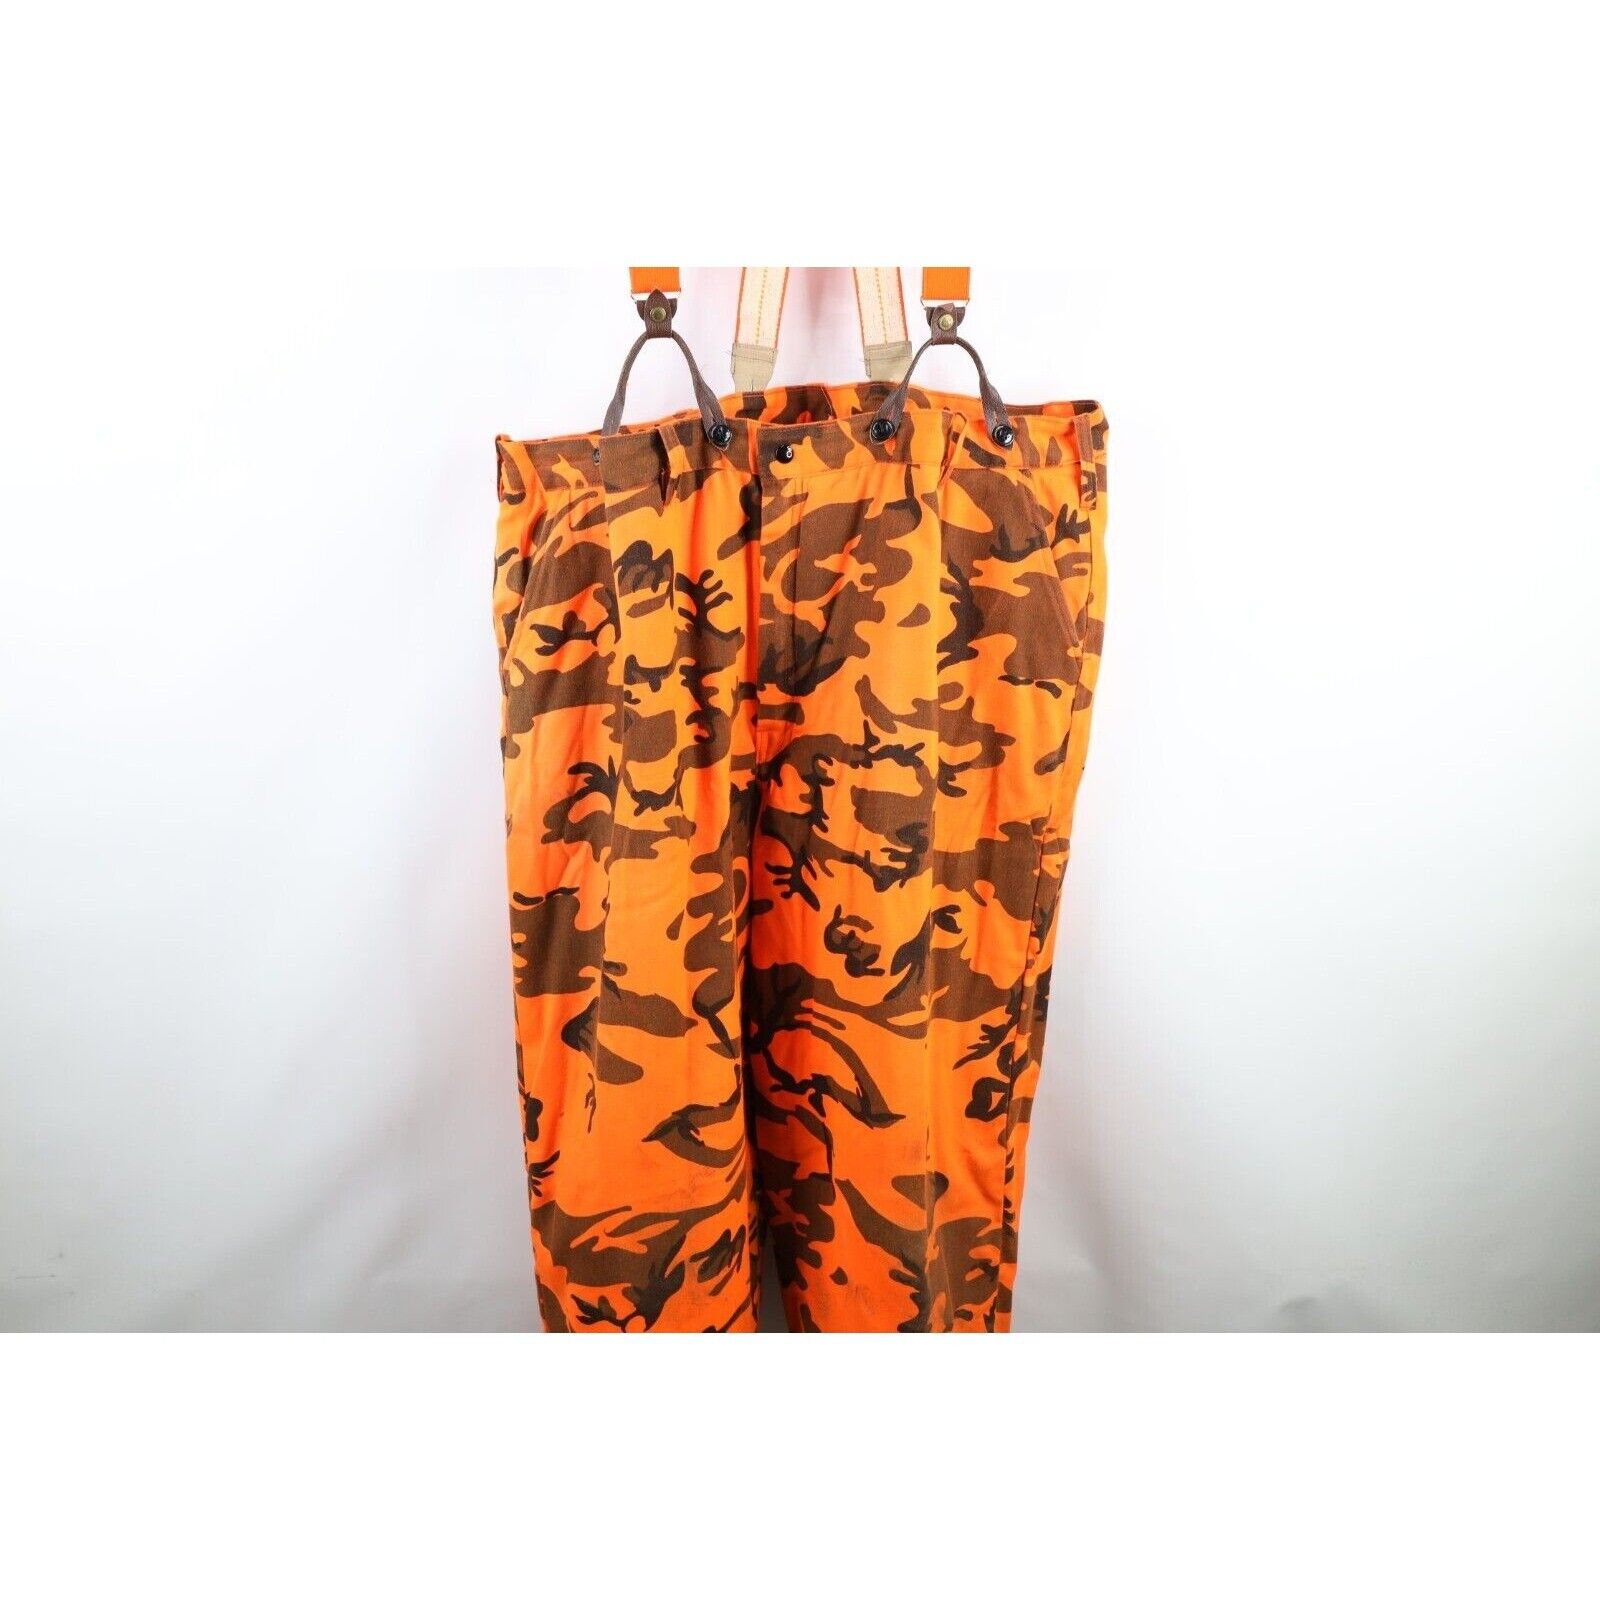 Vintage Vintage 70s Streetwear 3XL Insulated Camouflage Overalls Size US 44 / EU 60 - 3 Thumbnail